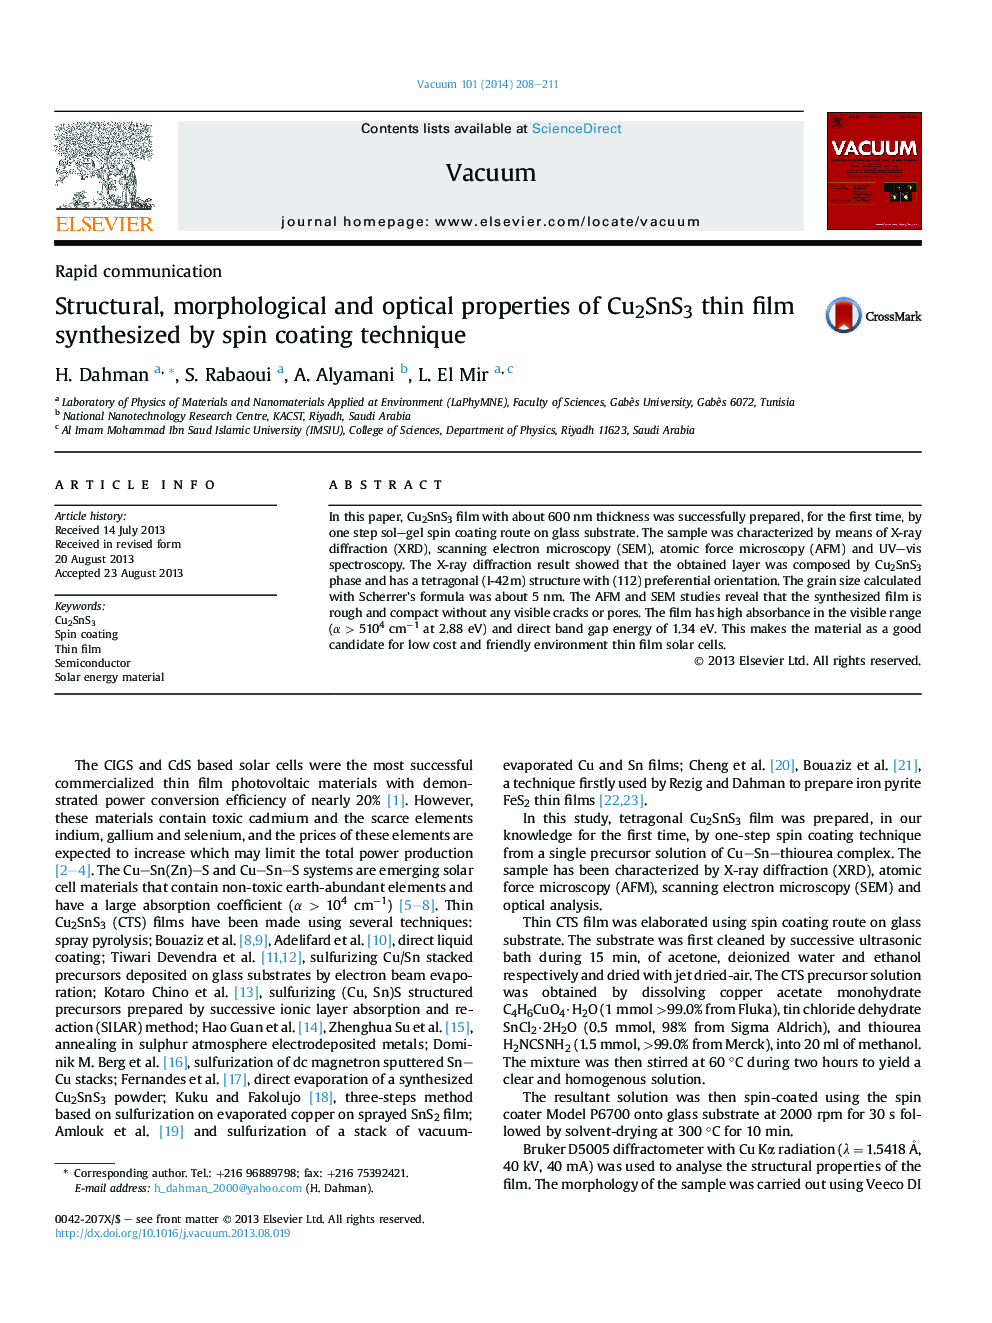 Structural, morphological and optical properties of Cu2SnS3 thin film synthesized by spin coating technique